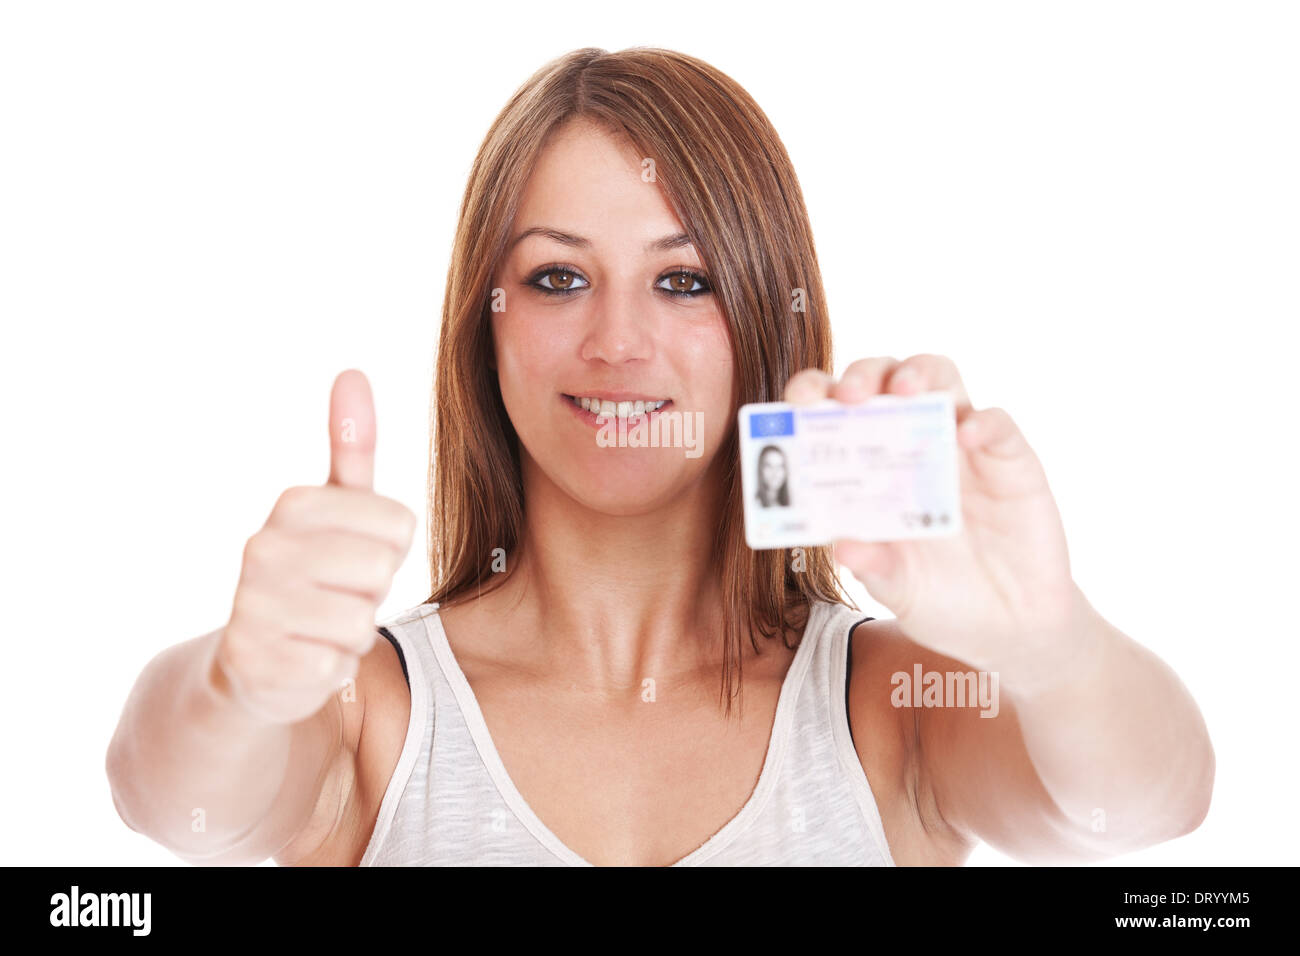 Attractive girl proudly showing her drivers licence. All on white background. Stock Photo